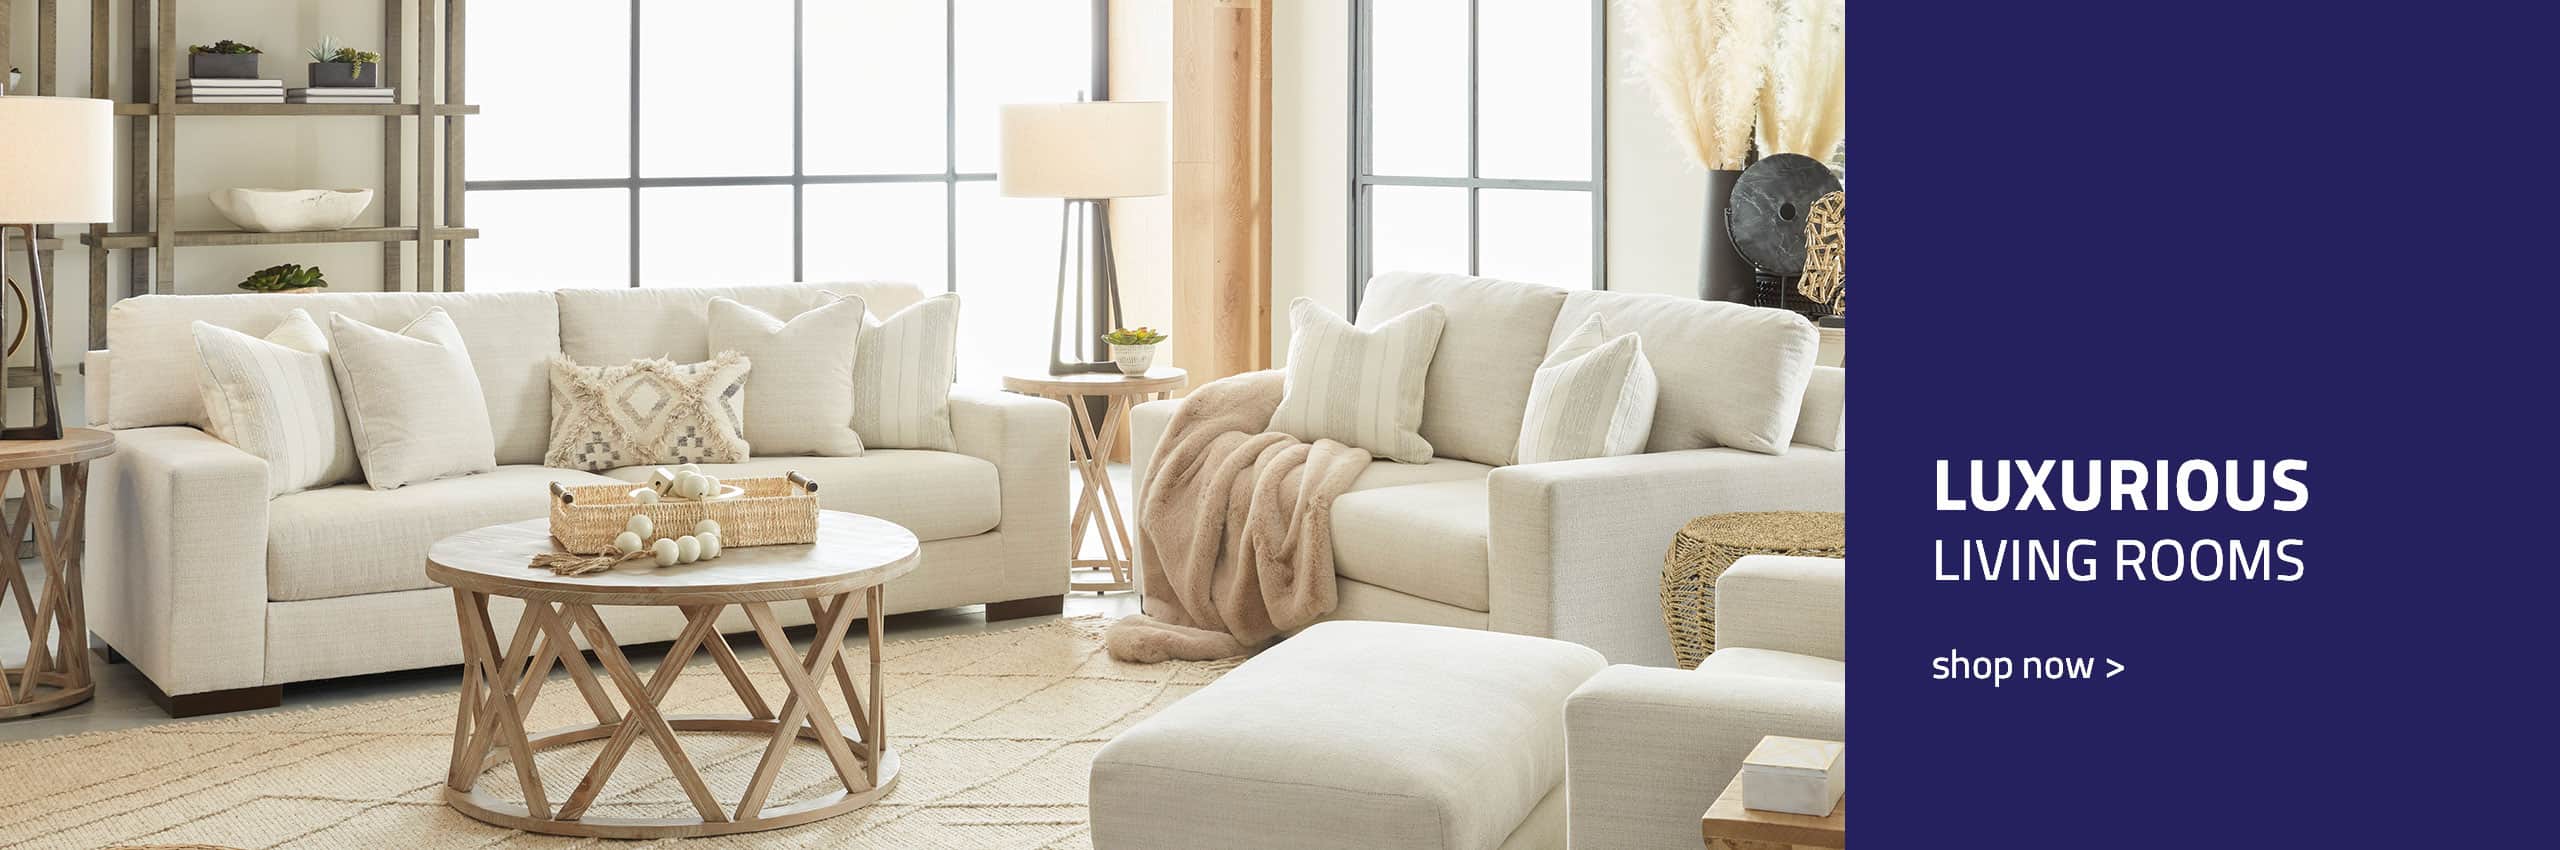 Luxurious Living Rooms – Shop now